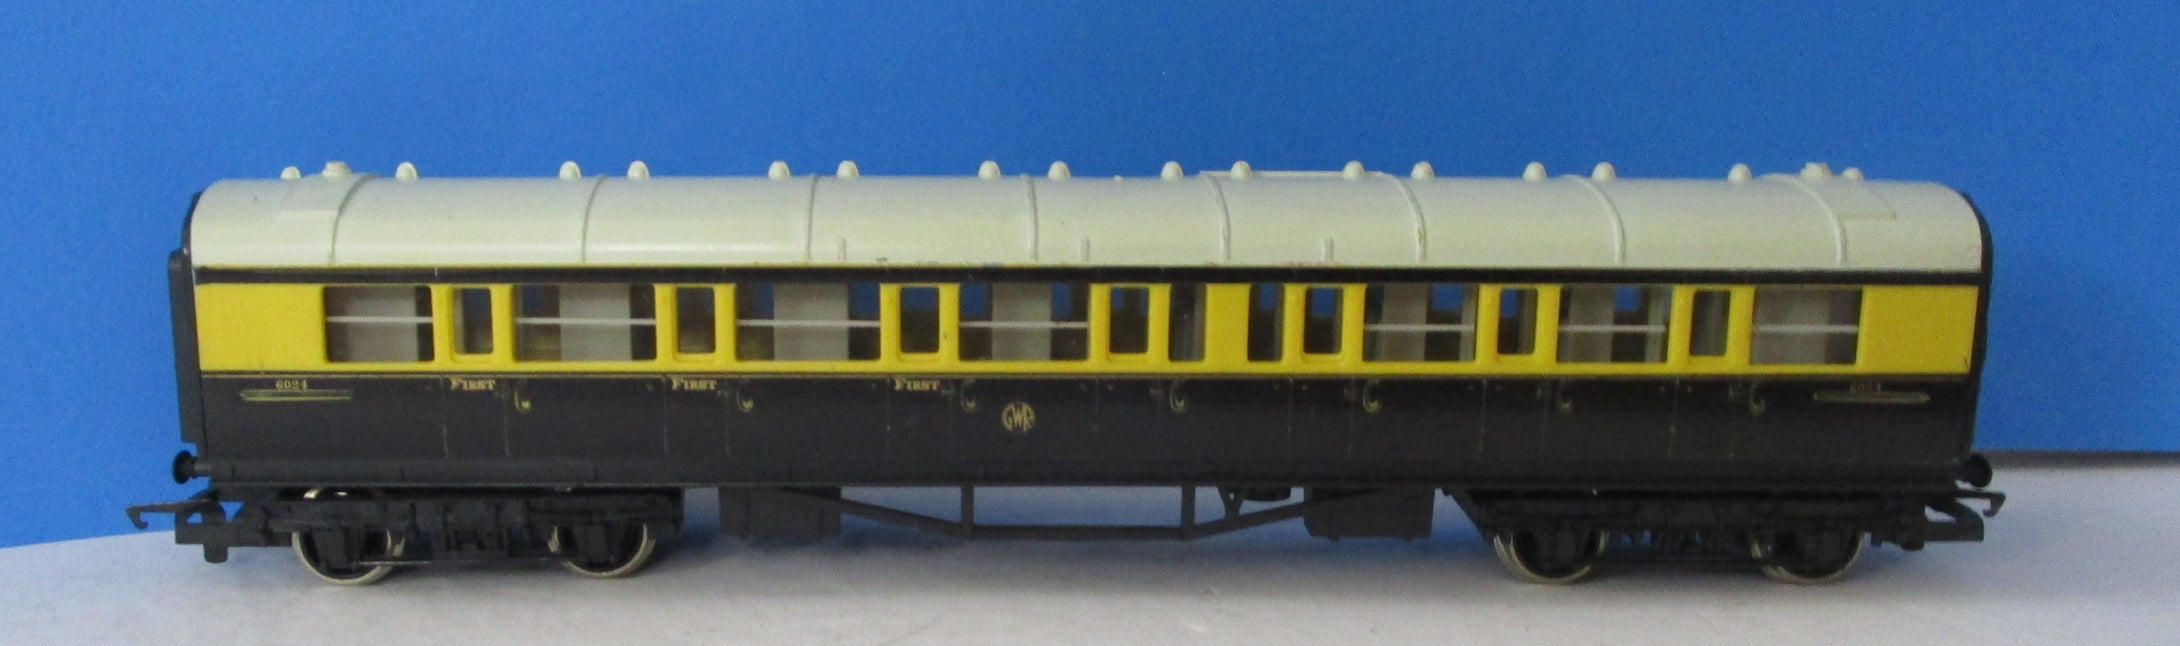 R456 HORNBY GWR Composite coach 6024 - UNBOXED